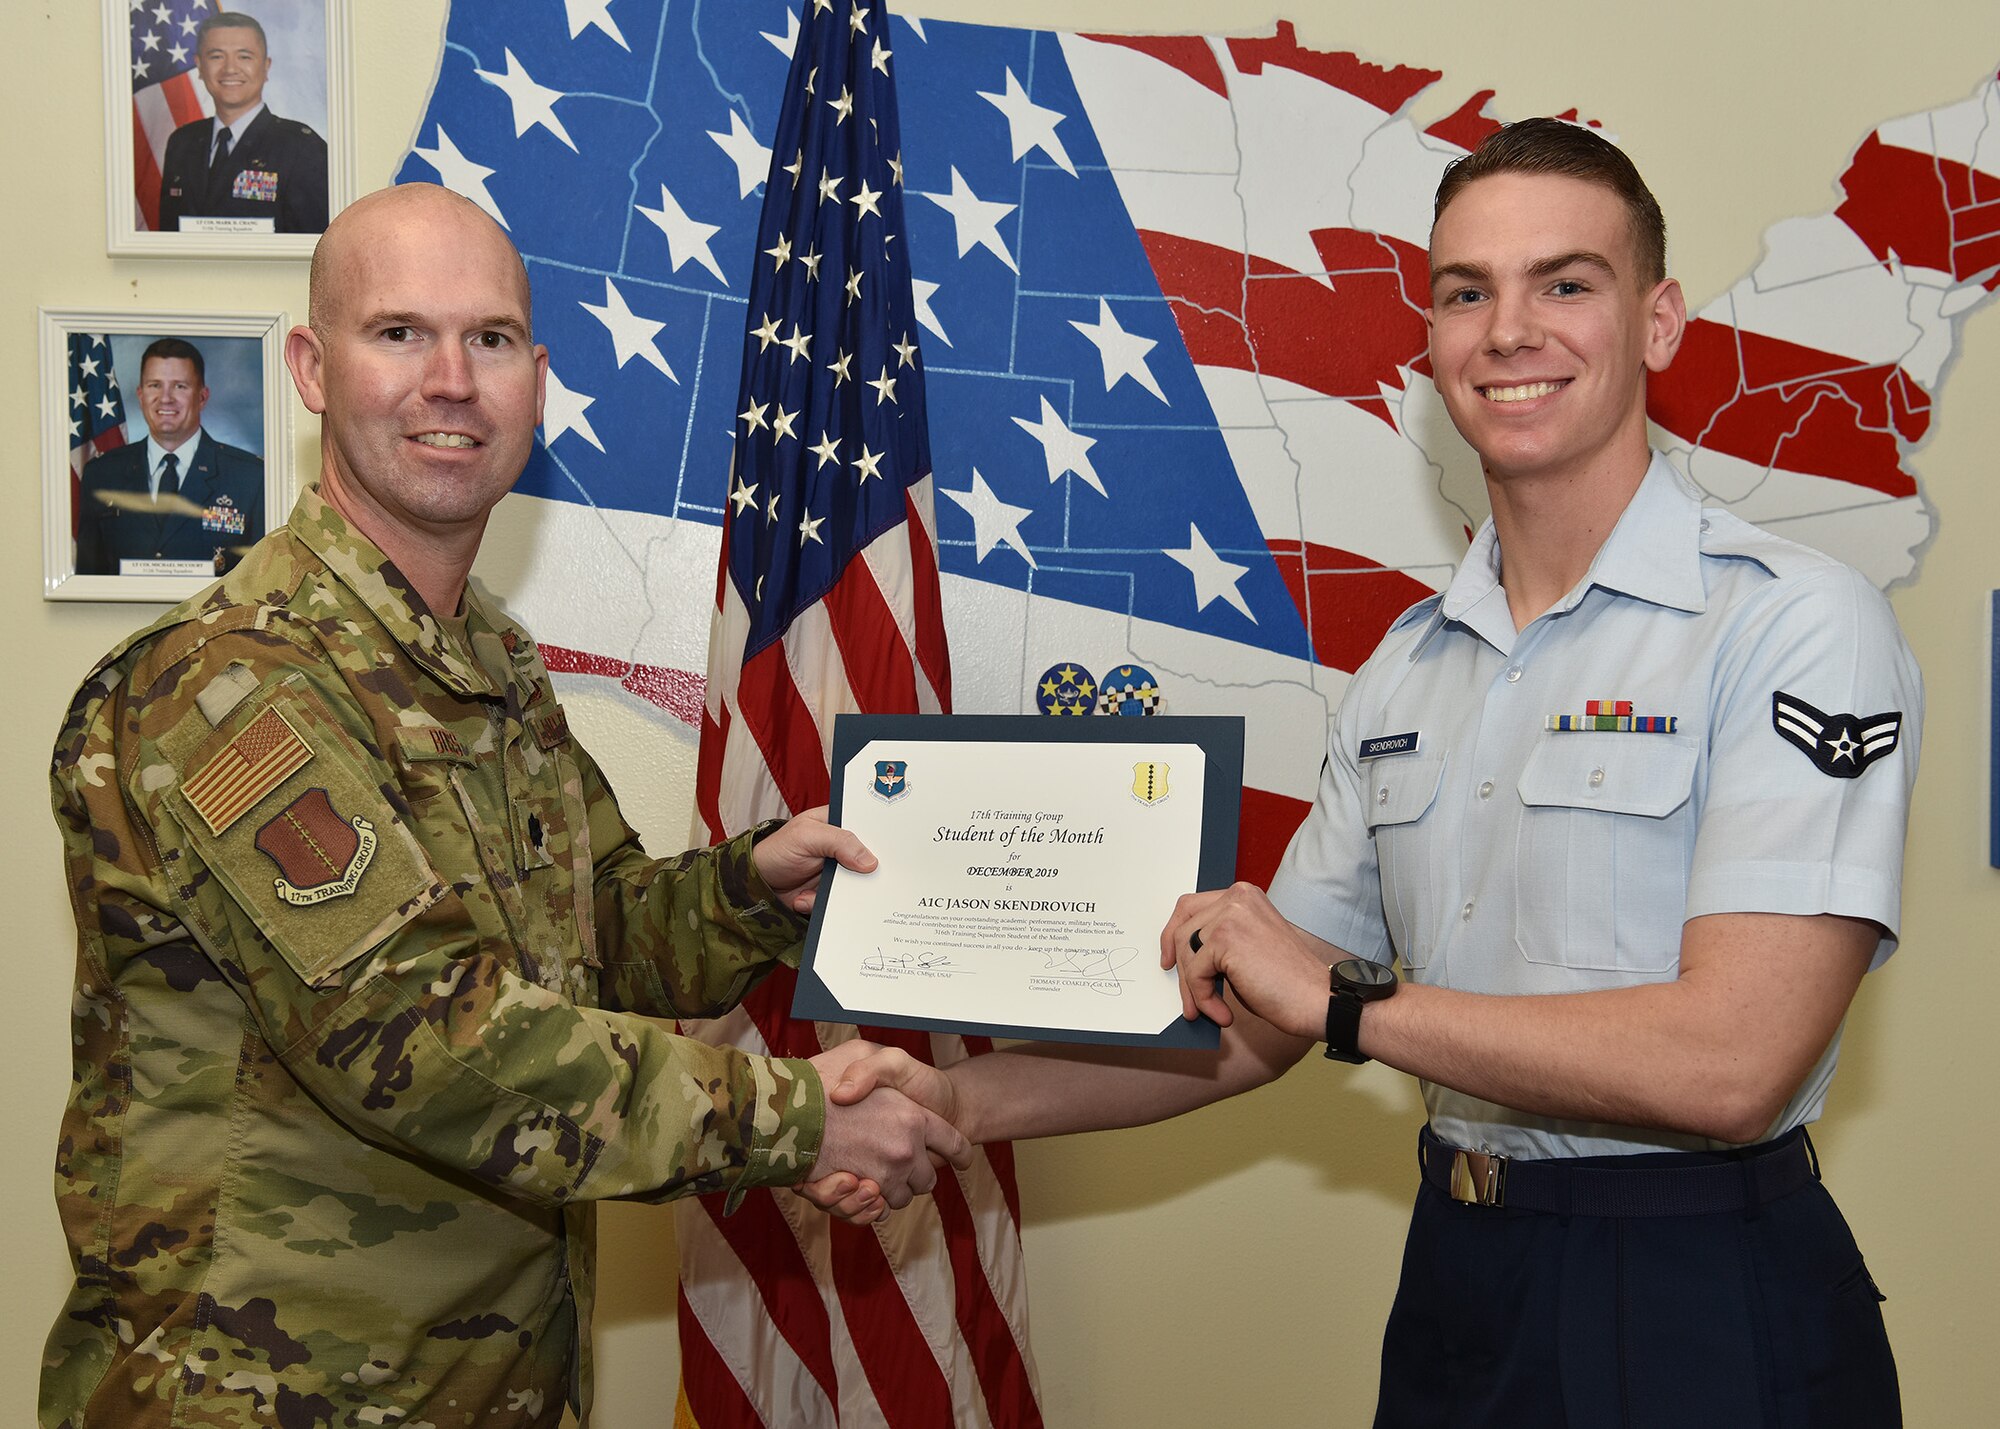 U.S. Air Force Lt. Col. Kevin Boss, 17th Training Group deputy commander, presents the 316th Training Squadron Student of the Month award to Airman 1st Class Jason Skendrovich, 316th TRS student, at Brandenburg Hall on Goodfellow Air Force Base, Texas, Jan. 10, 2019. The 316th TRS’s mission is to conduct U.S. Air Force, U.S. Army, U.S. Marine Corps, U.S. Navy and U.S. Coast Guard cryptologic, human intelligence and military training. (U.S. Air Force photo by Staff Sgt. Chad Warren)